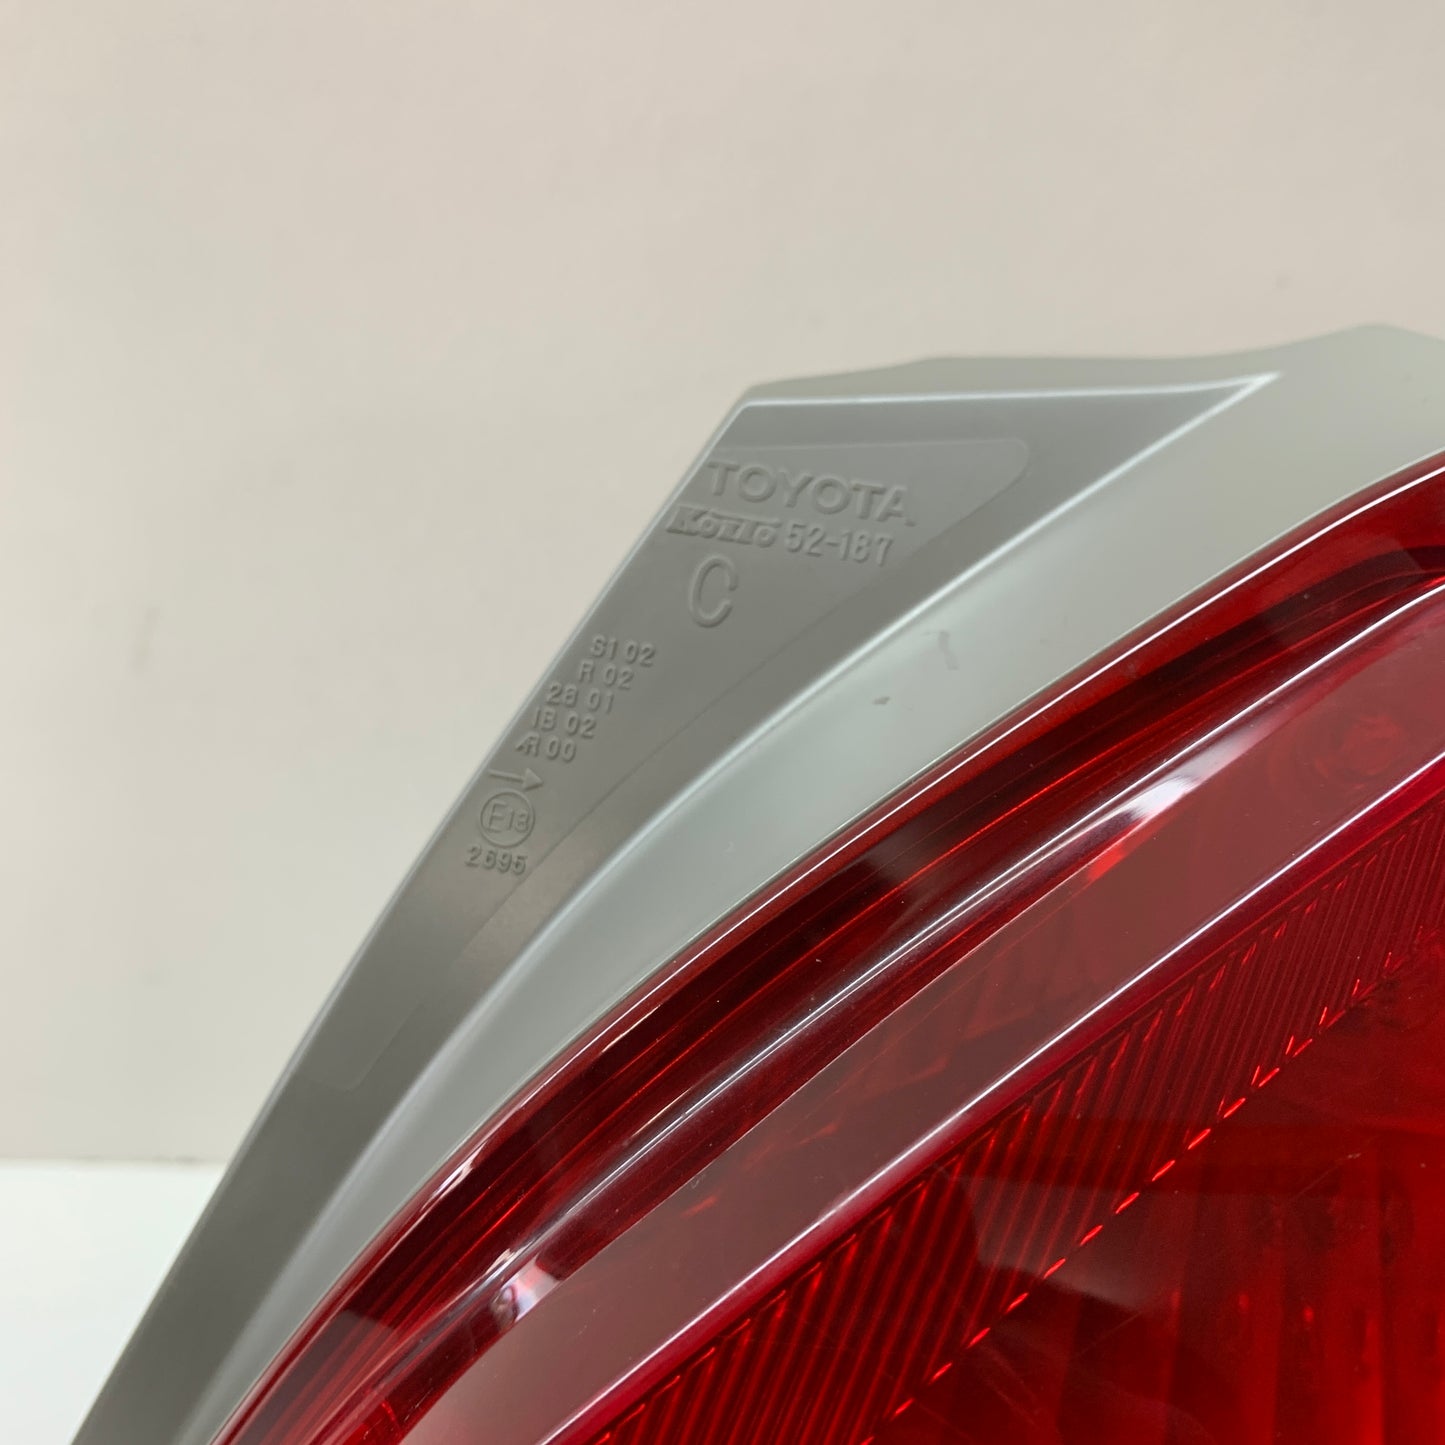 Toyota Yaris Hatchback Tail Light Right Hand Side NCP9# 2008 2009 2010 2011